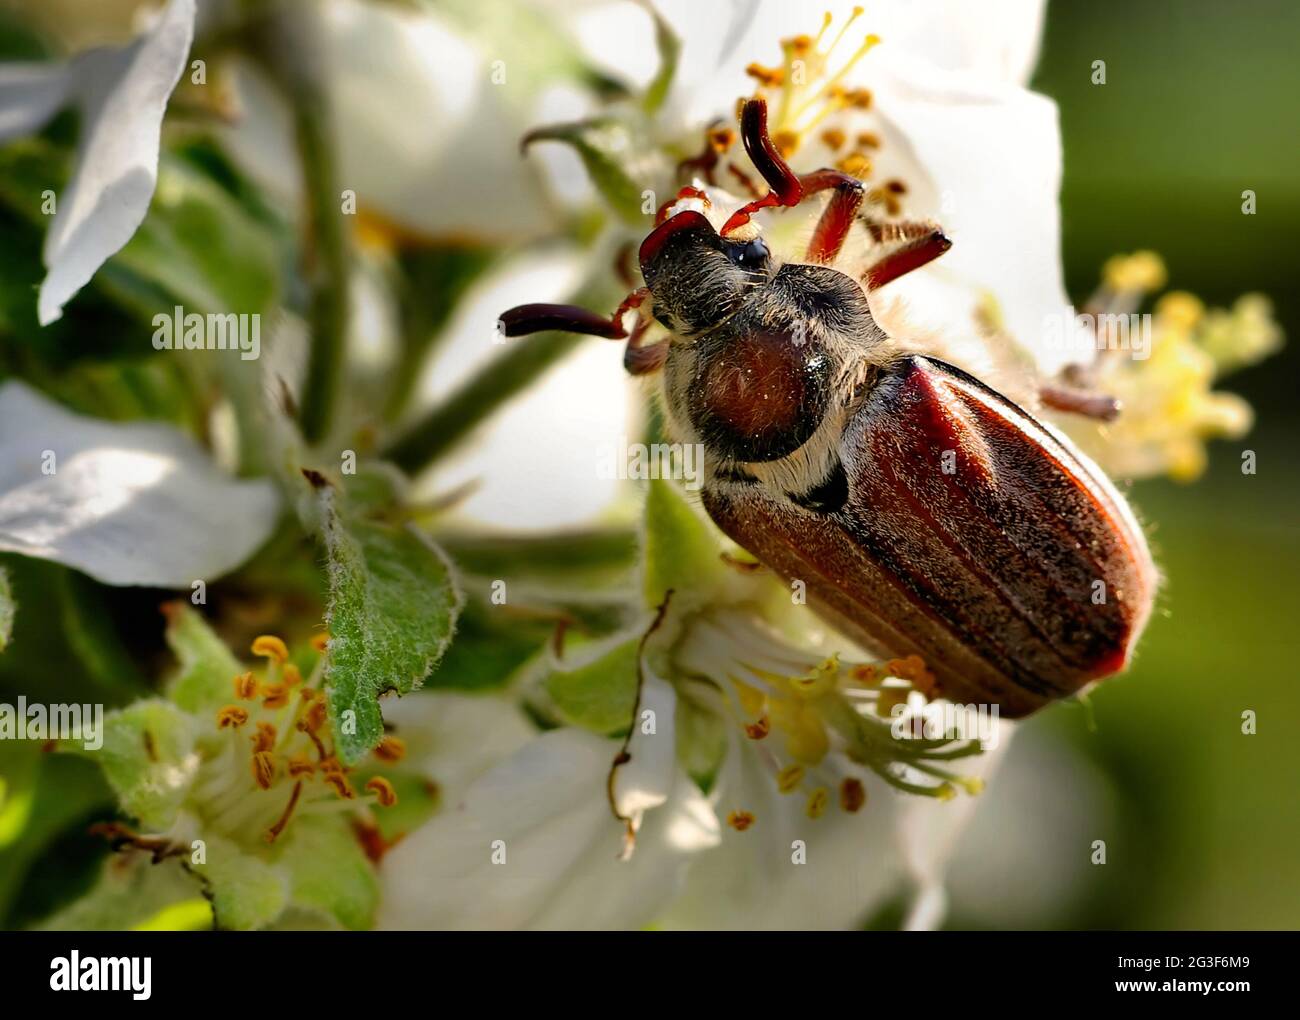 Cockchafer, maybeetle, Foto Stock